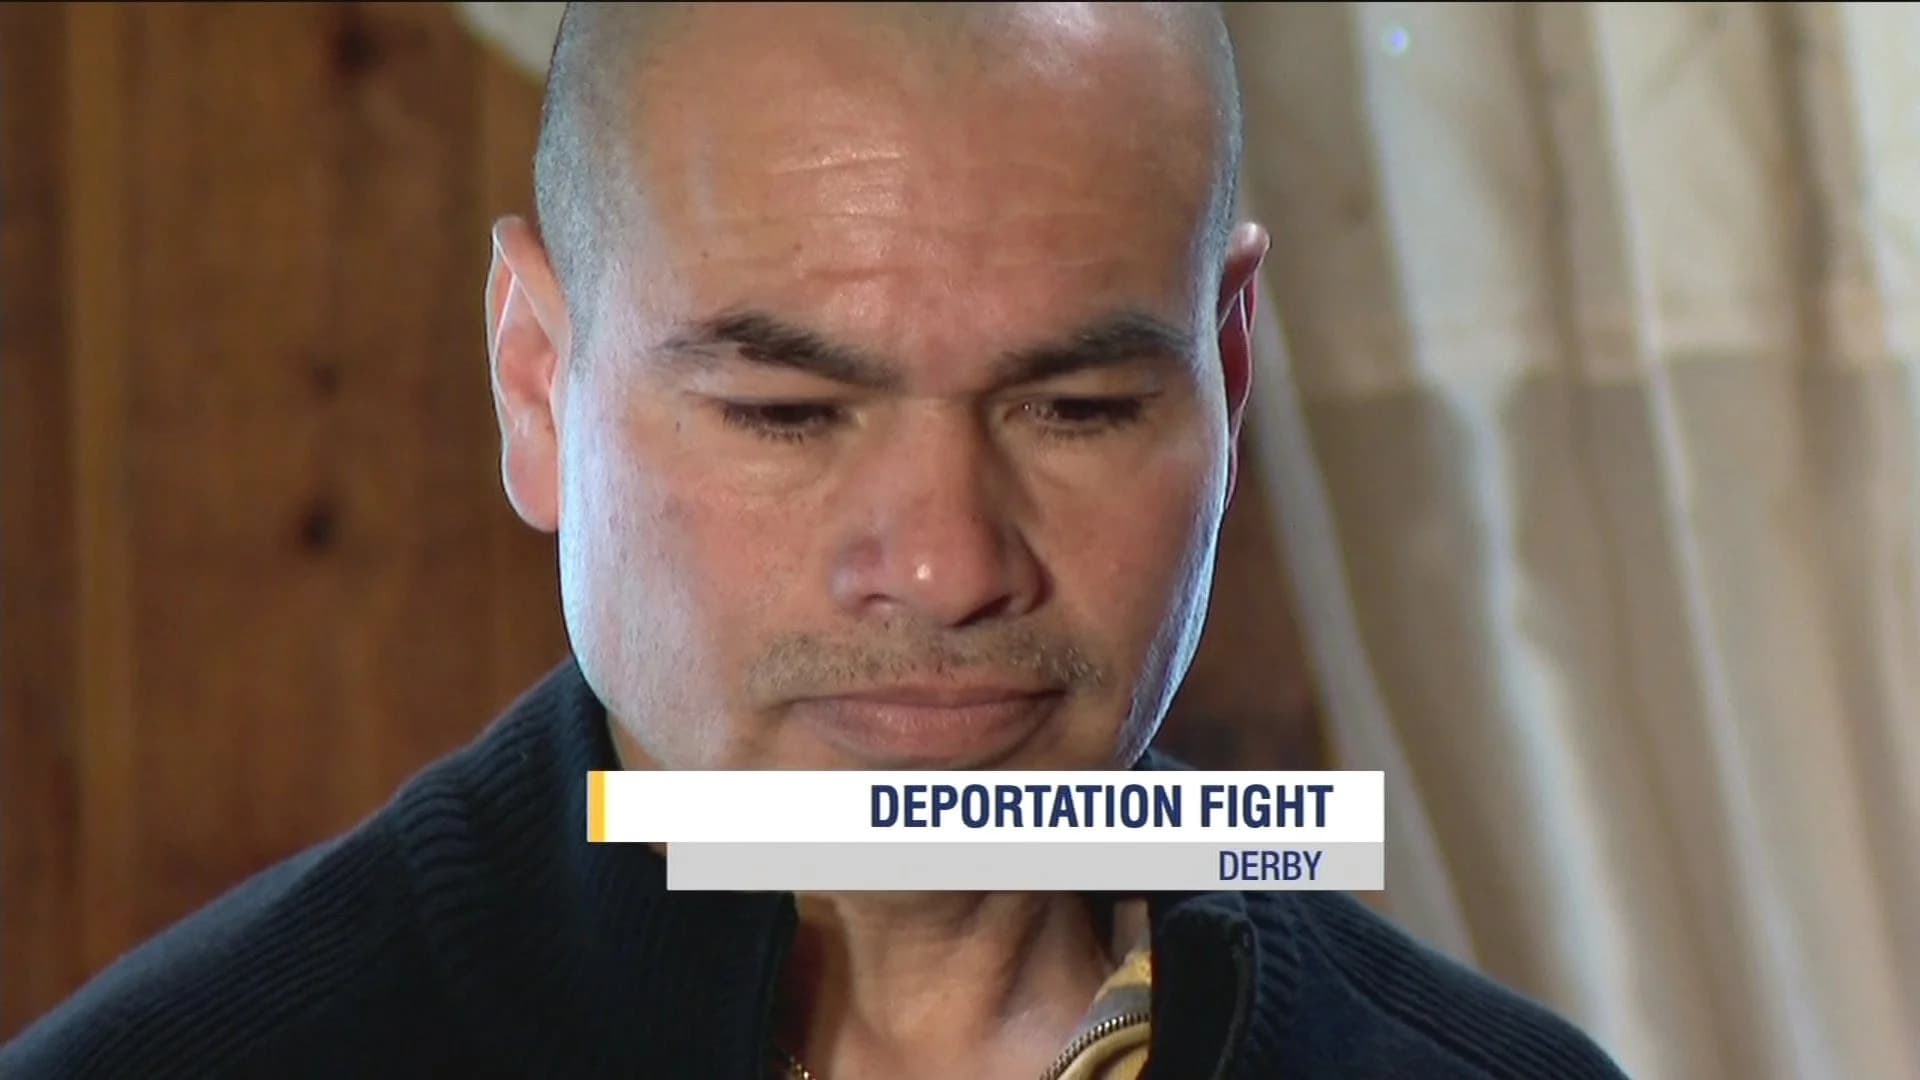 Derby man Luis Barrios faces deportation to Guatemala for missed meeting 20 years ago